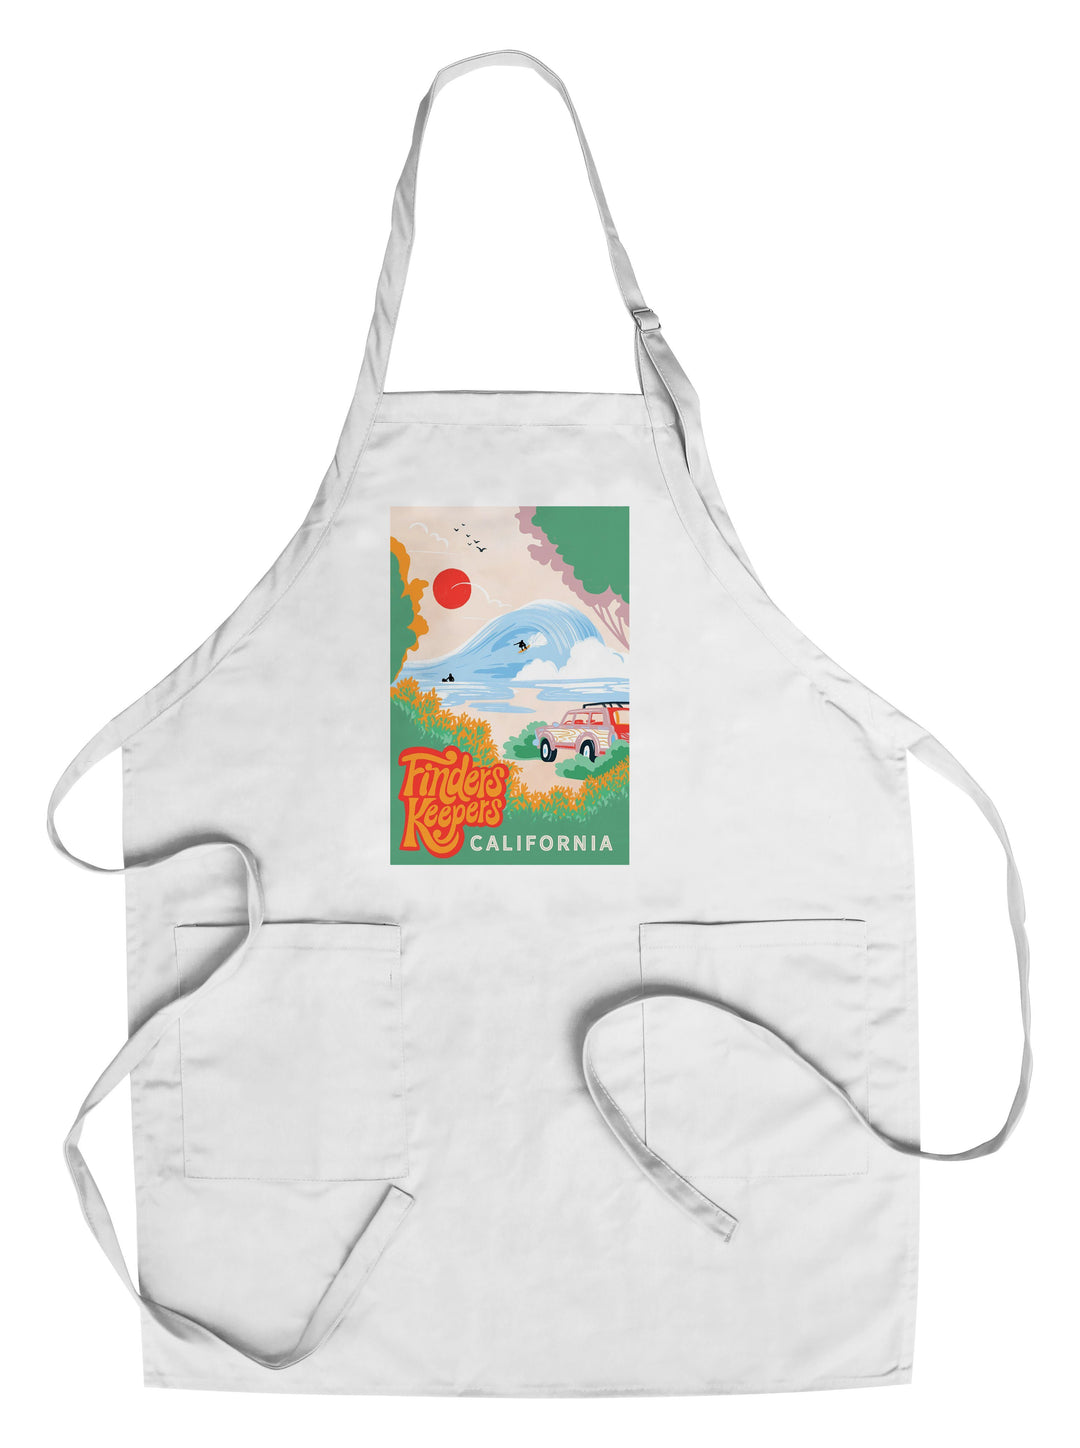 California, Secret Surf Spot Collection, Surf Scene at the Beach, Finders Keepers, Towels and Aprons Kitchen Lantern Press Chef's Apron 